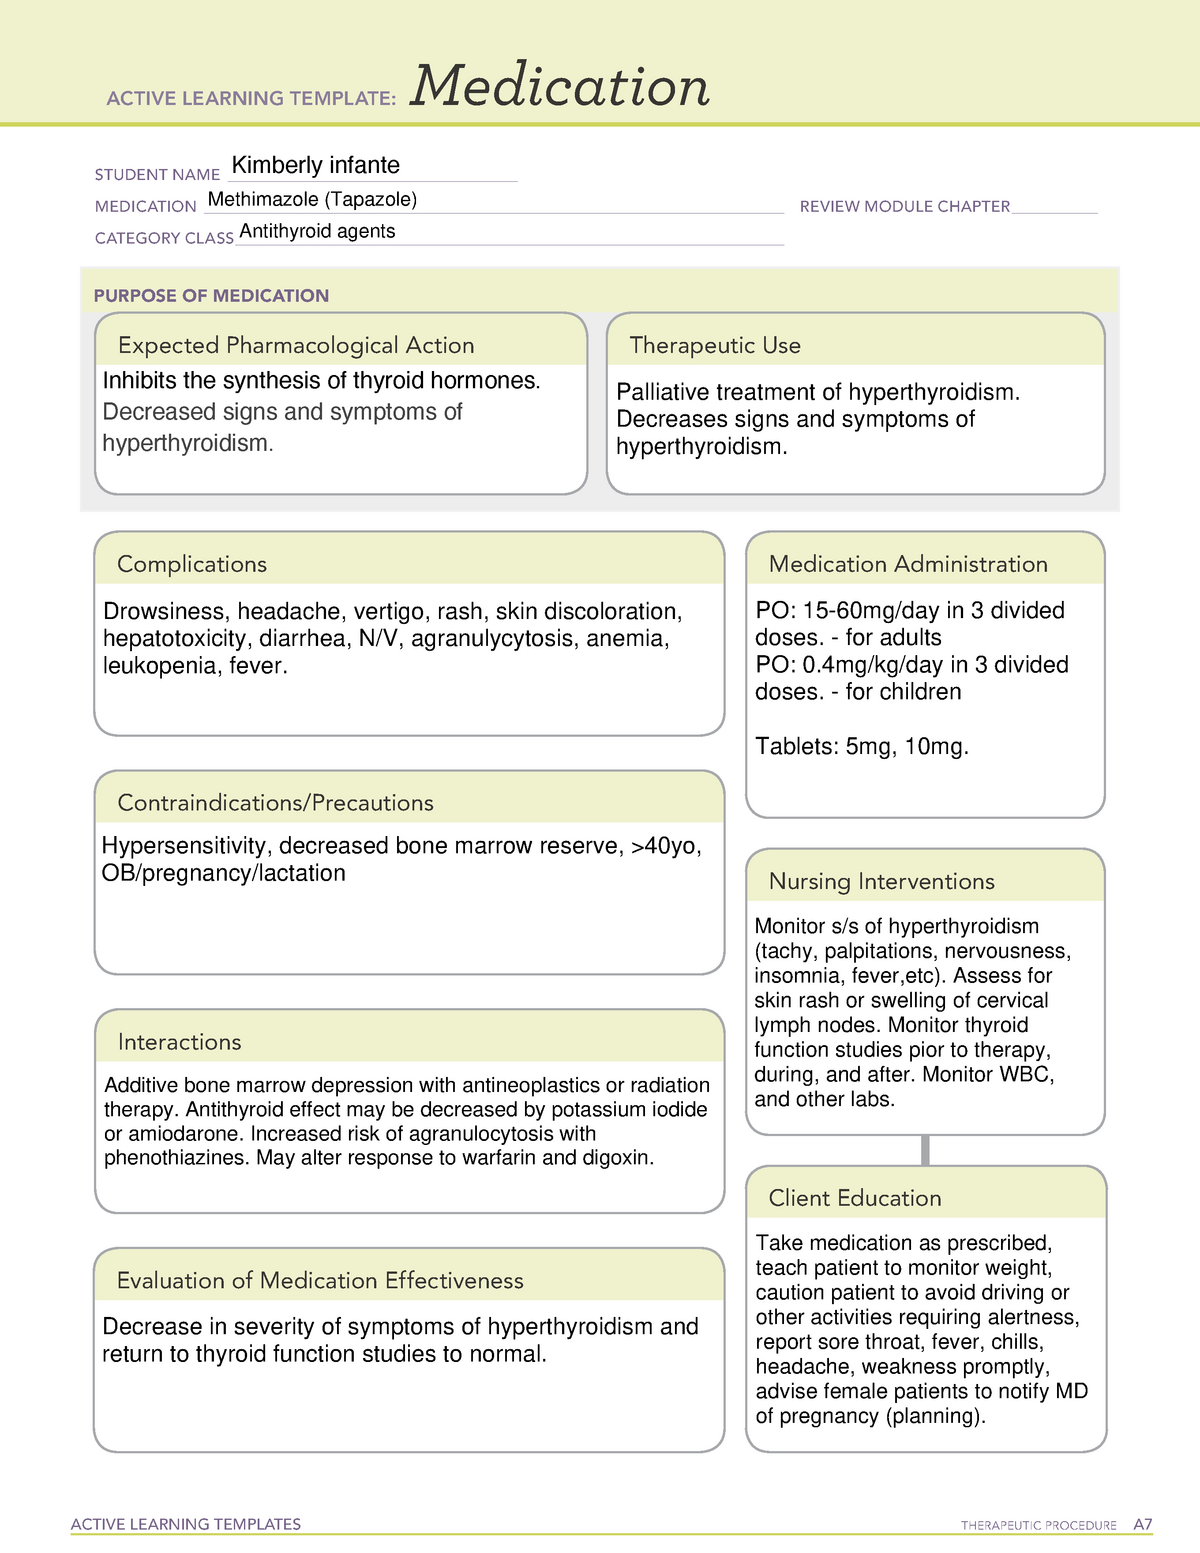 Med Card methimazole medication ati template ACTIVE LEARNING